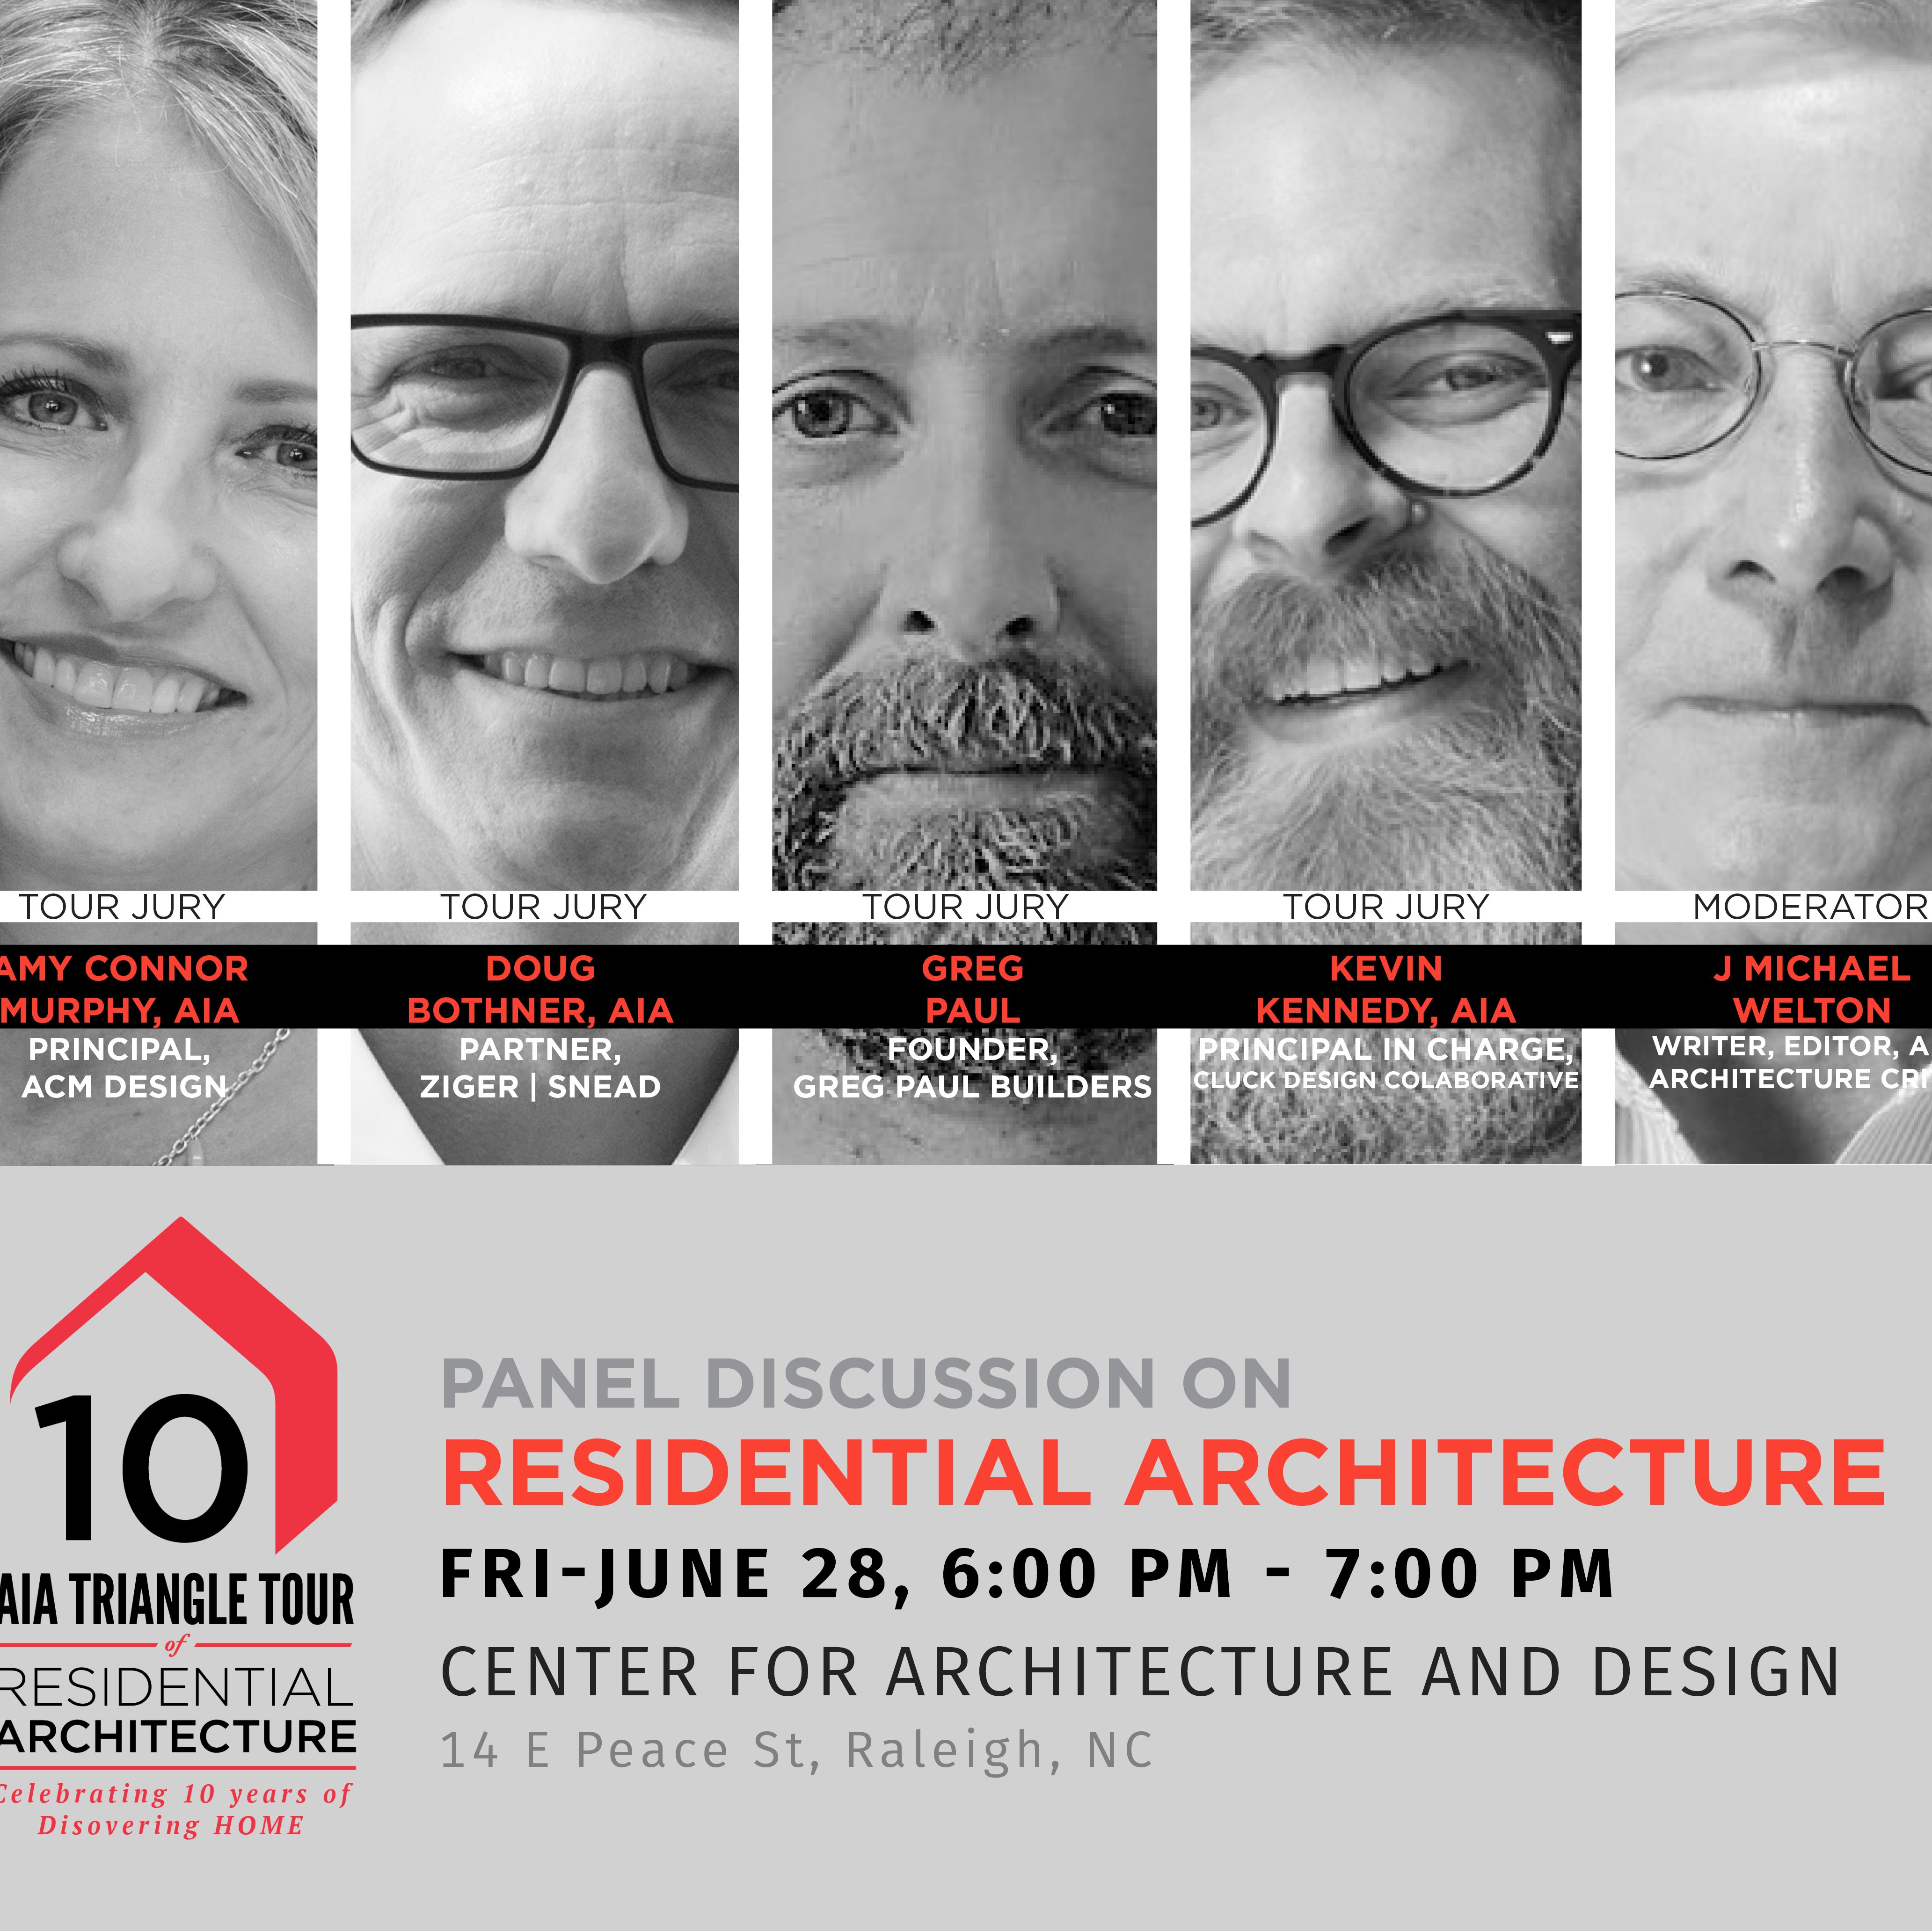 They’ll be participating in a panel discussion on residential architecture, one that’s open to the public.